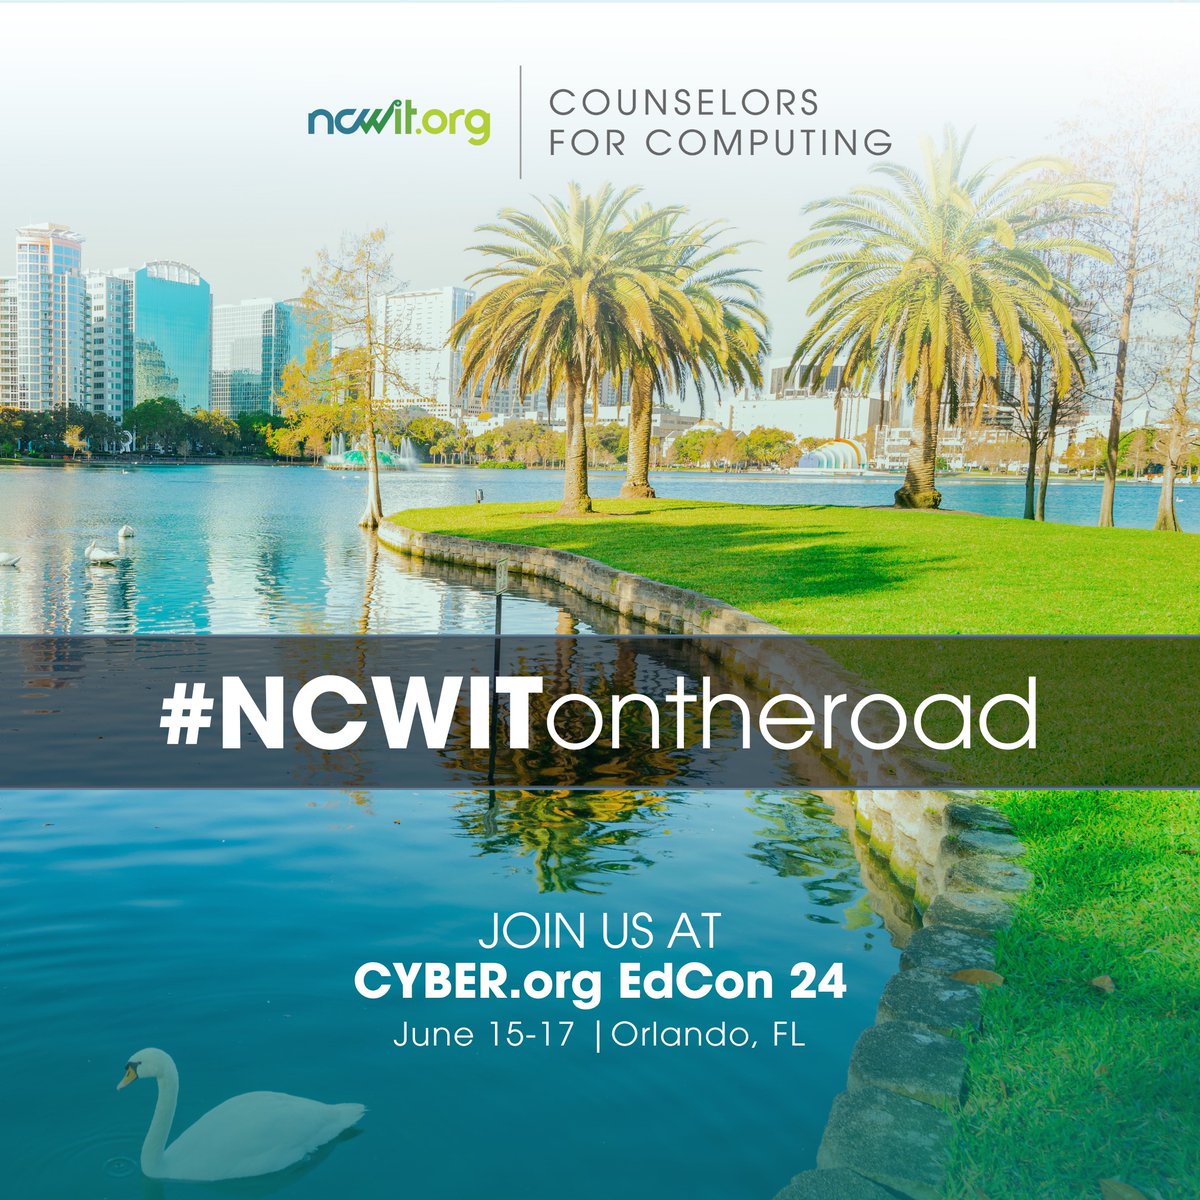 This summer, find #NCWITontheroad at @cyber_dot_org EdCon 24 in Orlando!

Join us for presentations about:
- K-5 Early Foundations
- Boosting CS with Counselors
- Digital Safety
- Future-Ready Pathways

Learn more and register online: cyber.org/EdCon

See you in June! 🌴